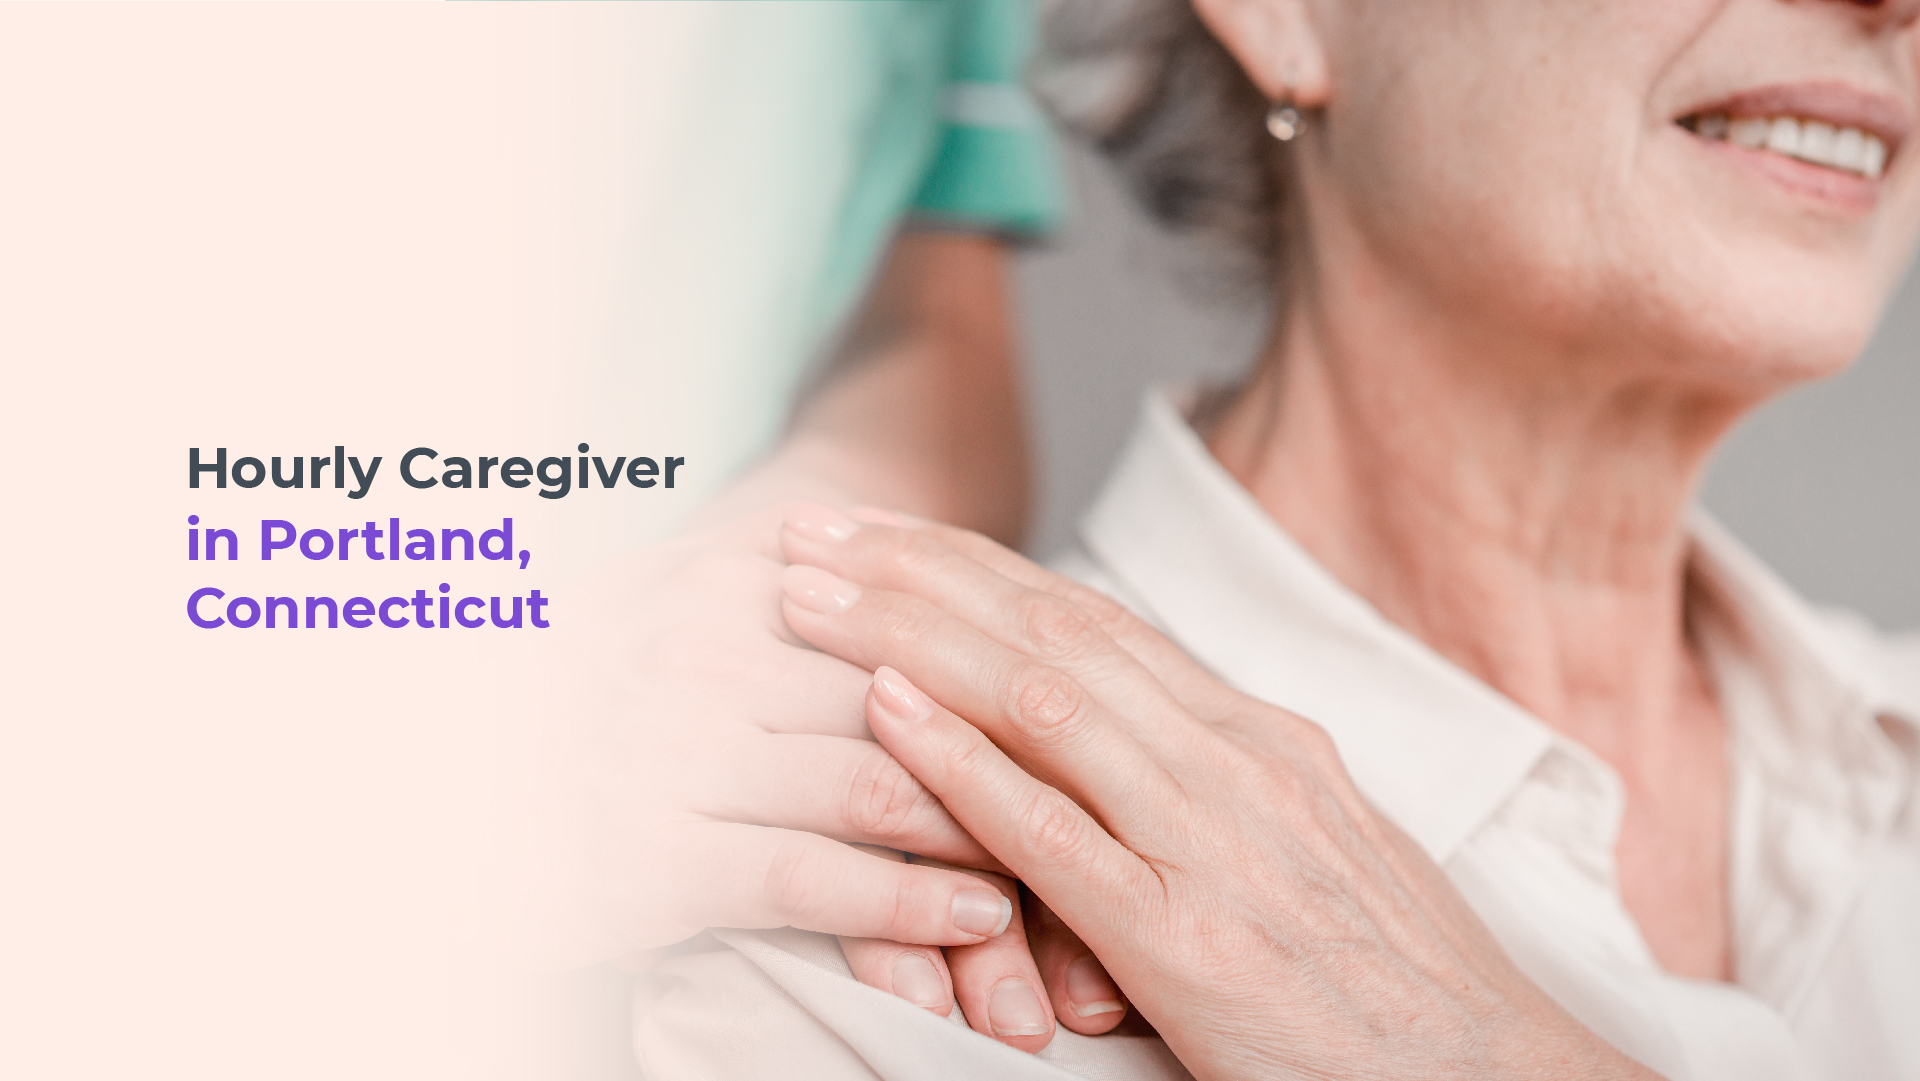 Hourly Caregivers in Portland Connecticut